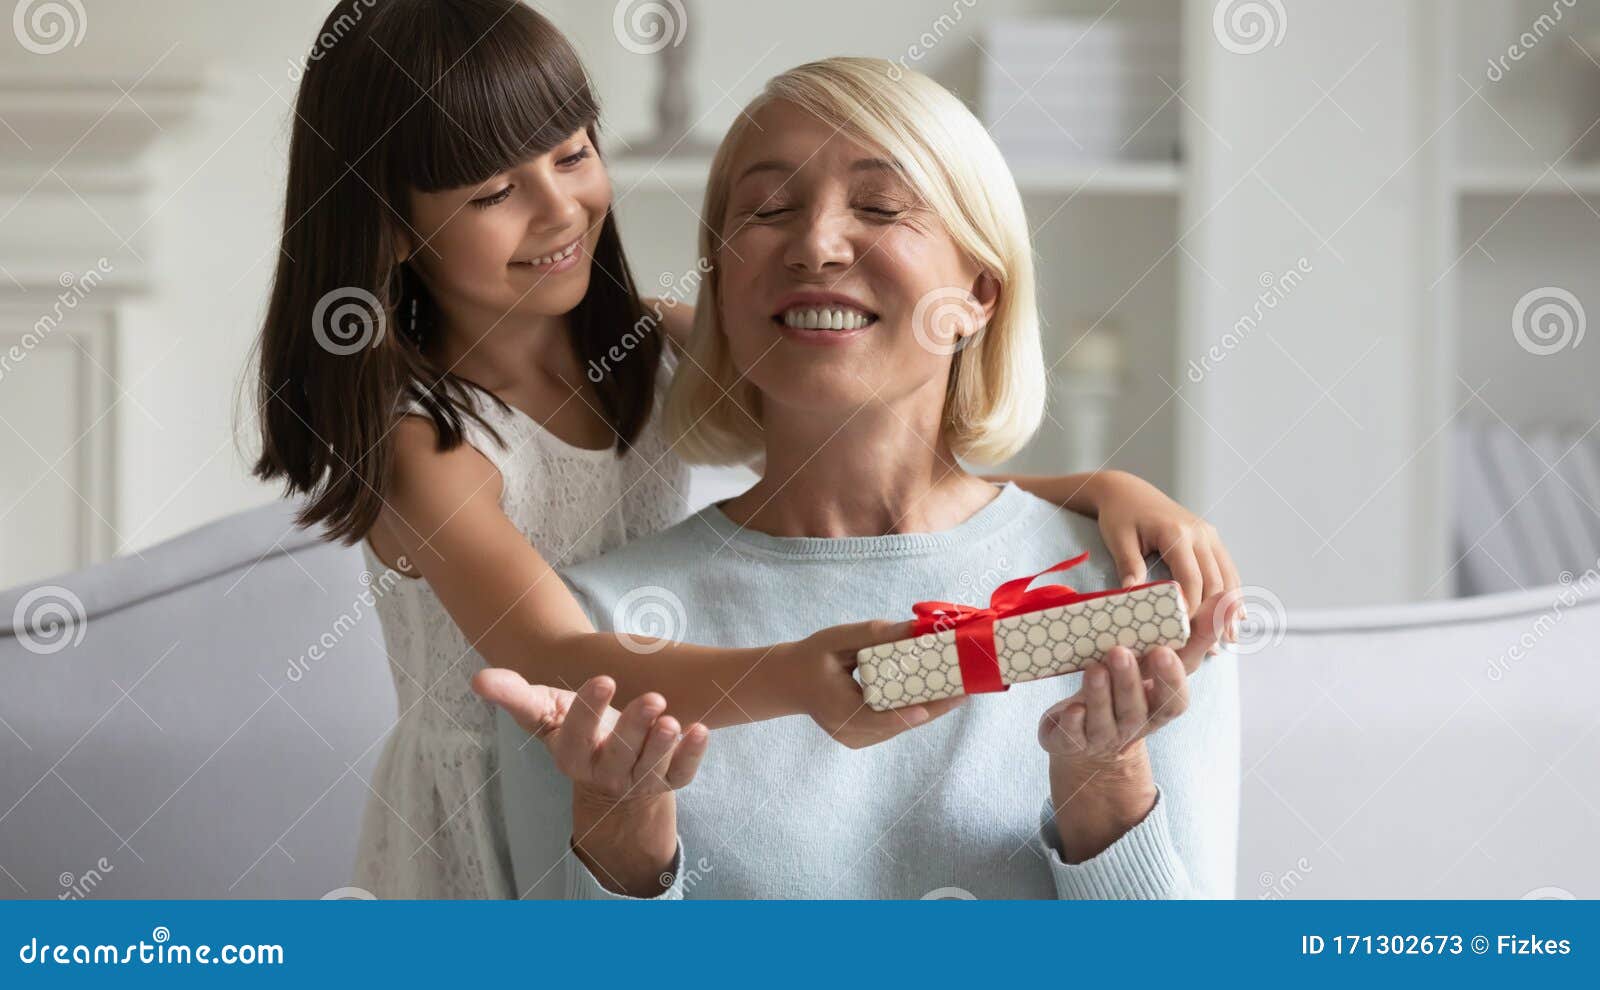 Grandmother making love Loving Little Granddaughter Making Birthday Surprise For Excited Grandmother Stock Image Image Of Excited Girl 171302673